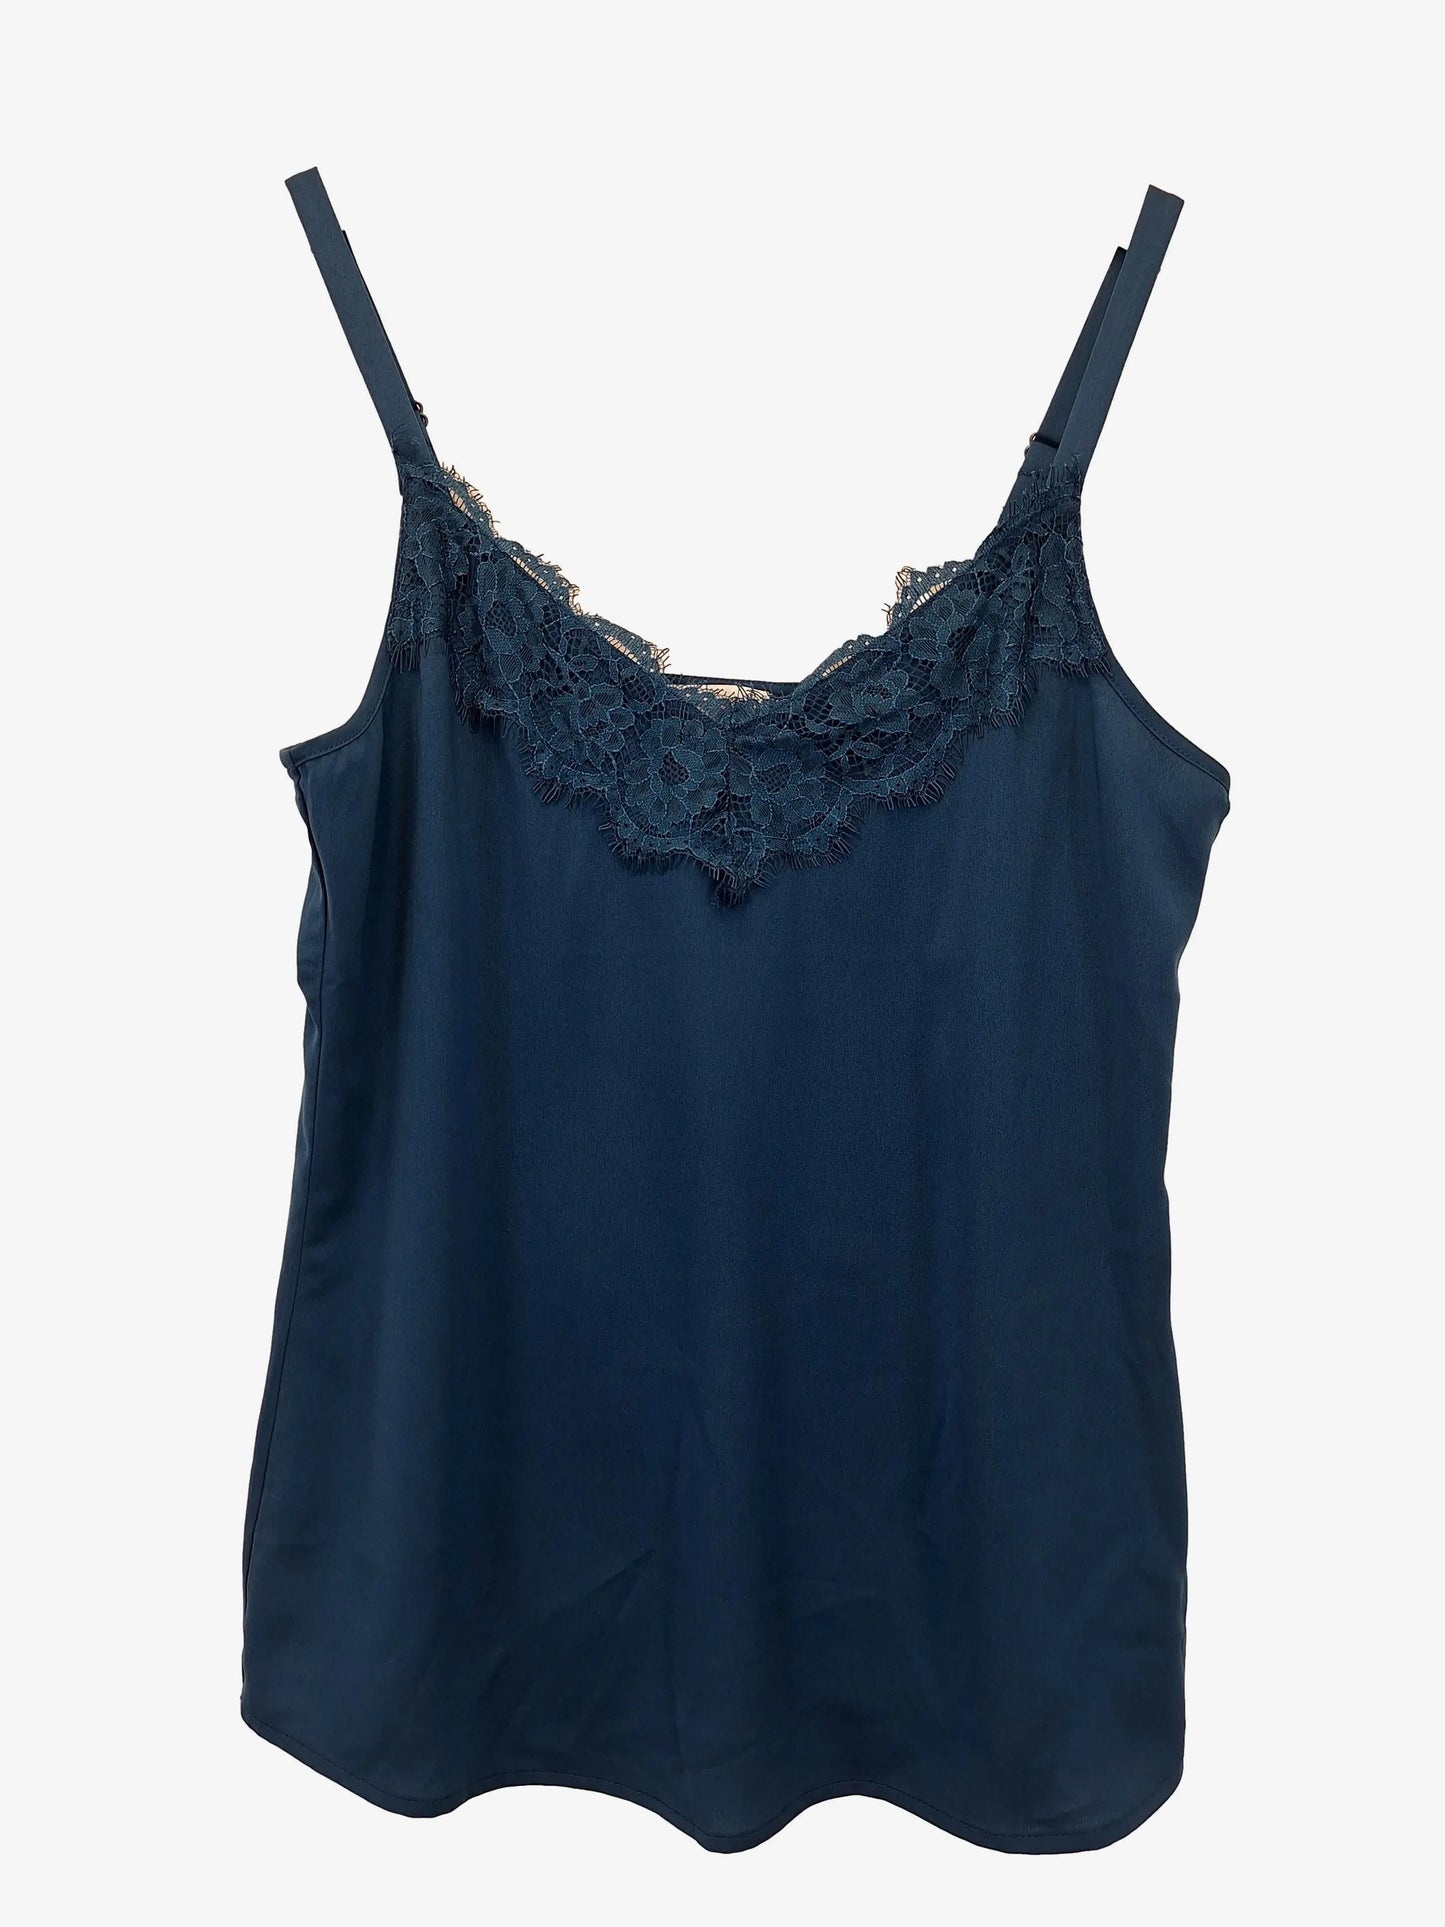 Review Teal Lace Trimmed Camisole Top Size 8 by SwapUp-Online Second Hand Store-Online Thrift Store